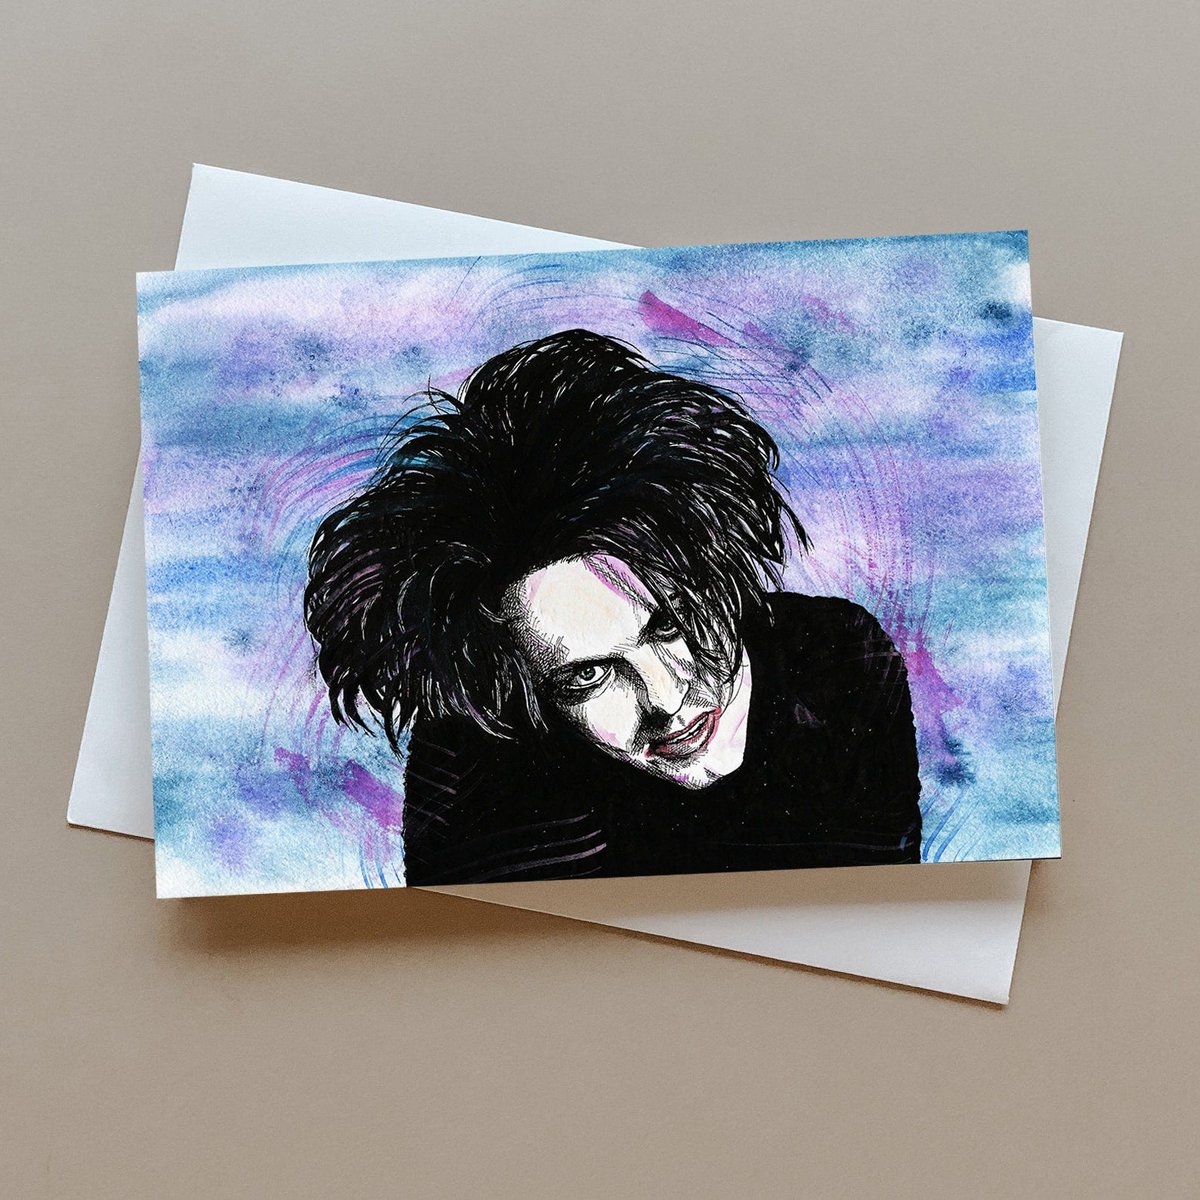 Robert Smith of The Cure greeting card | The Cure Gift | Goth | New Wave | 80s Music | Birthday Card | Cards tuppu.net/aea7ff74 #newWave #popCulture #wallArt #giftideas #greetingcards #RobertSmithPrint